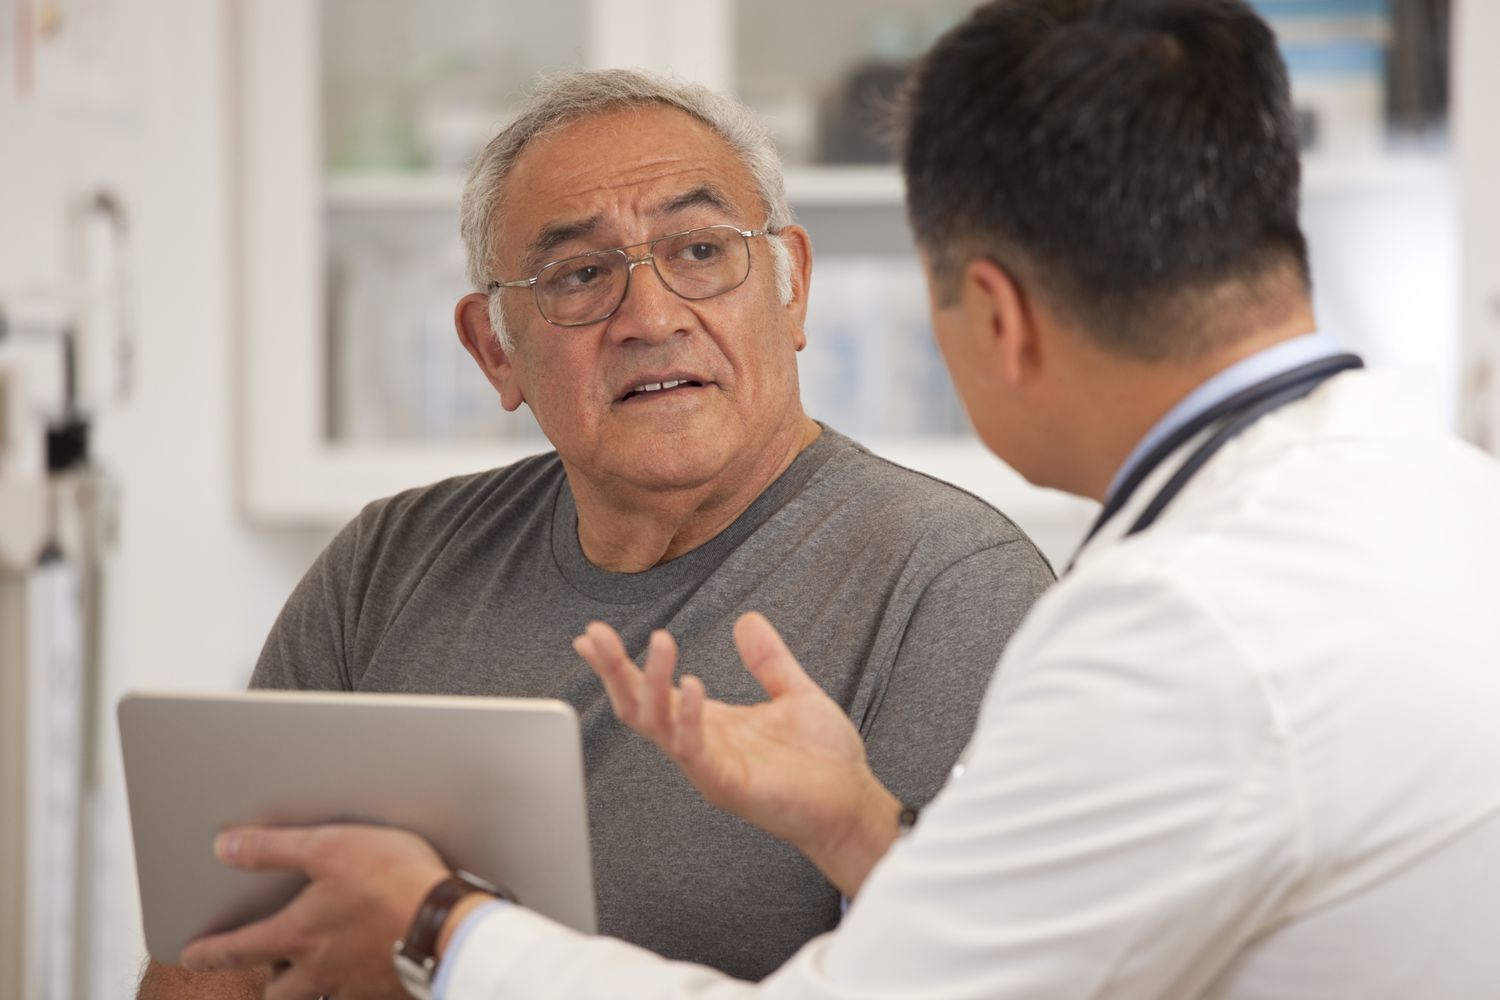 An older man talking to a doctor